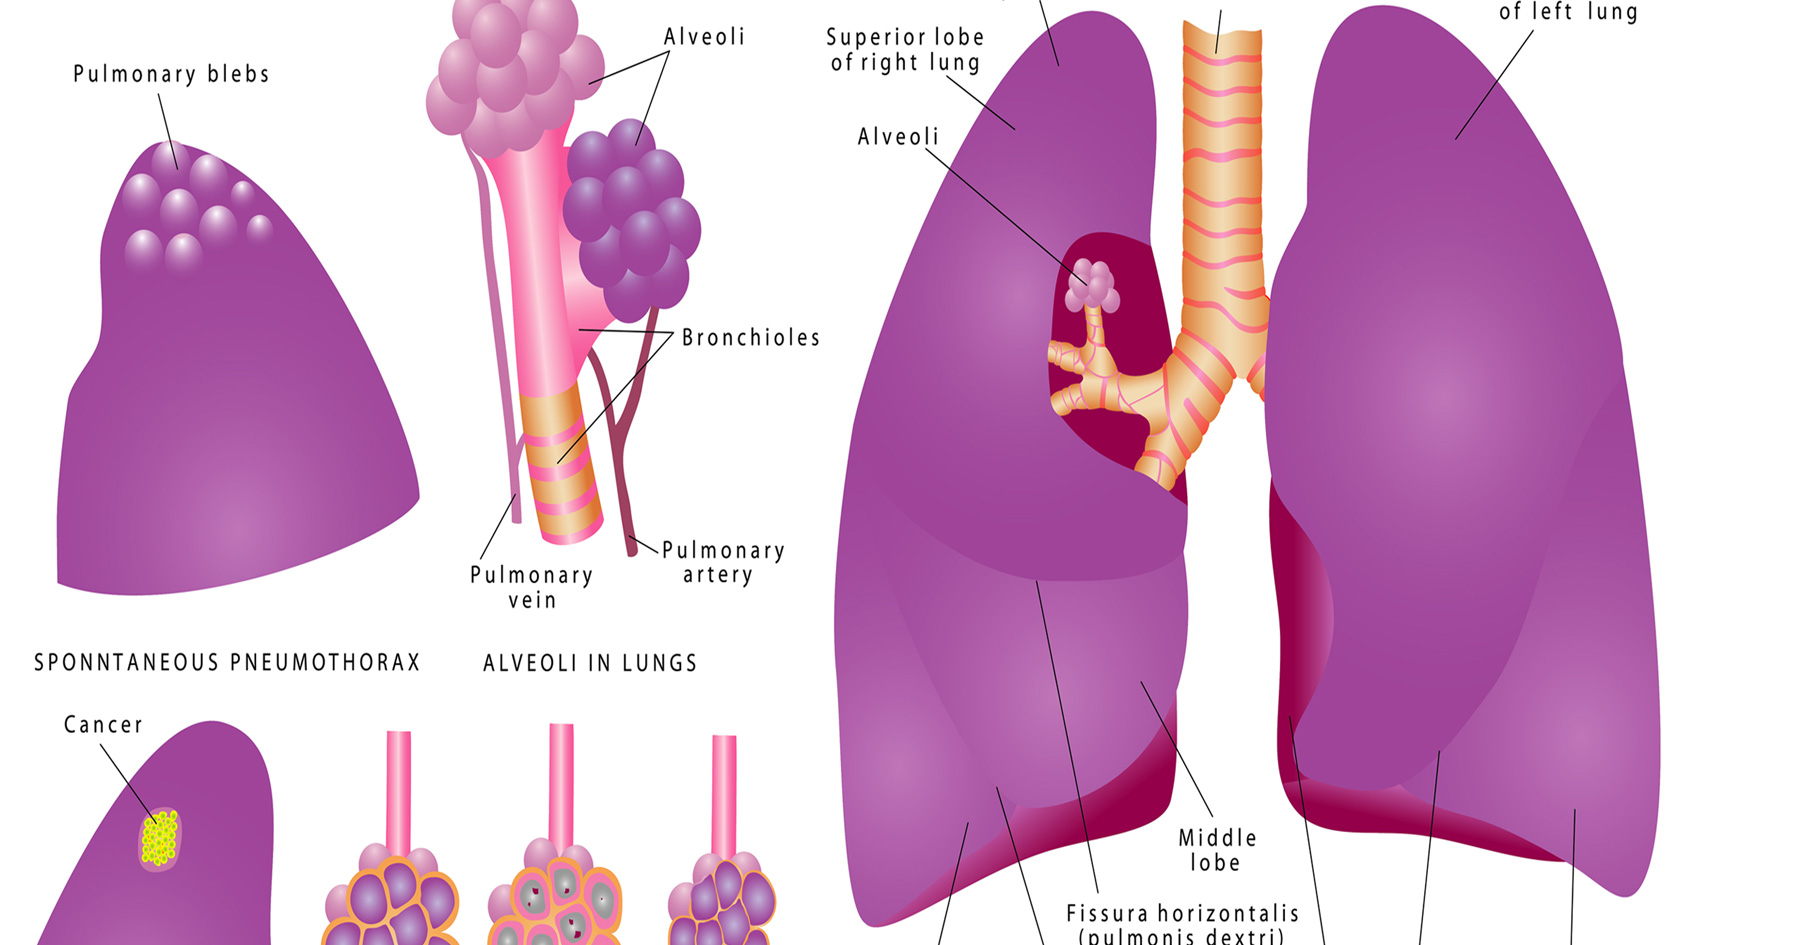 What Does Marijuana Do To Your Lungs